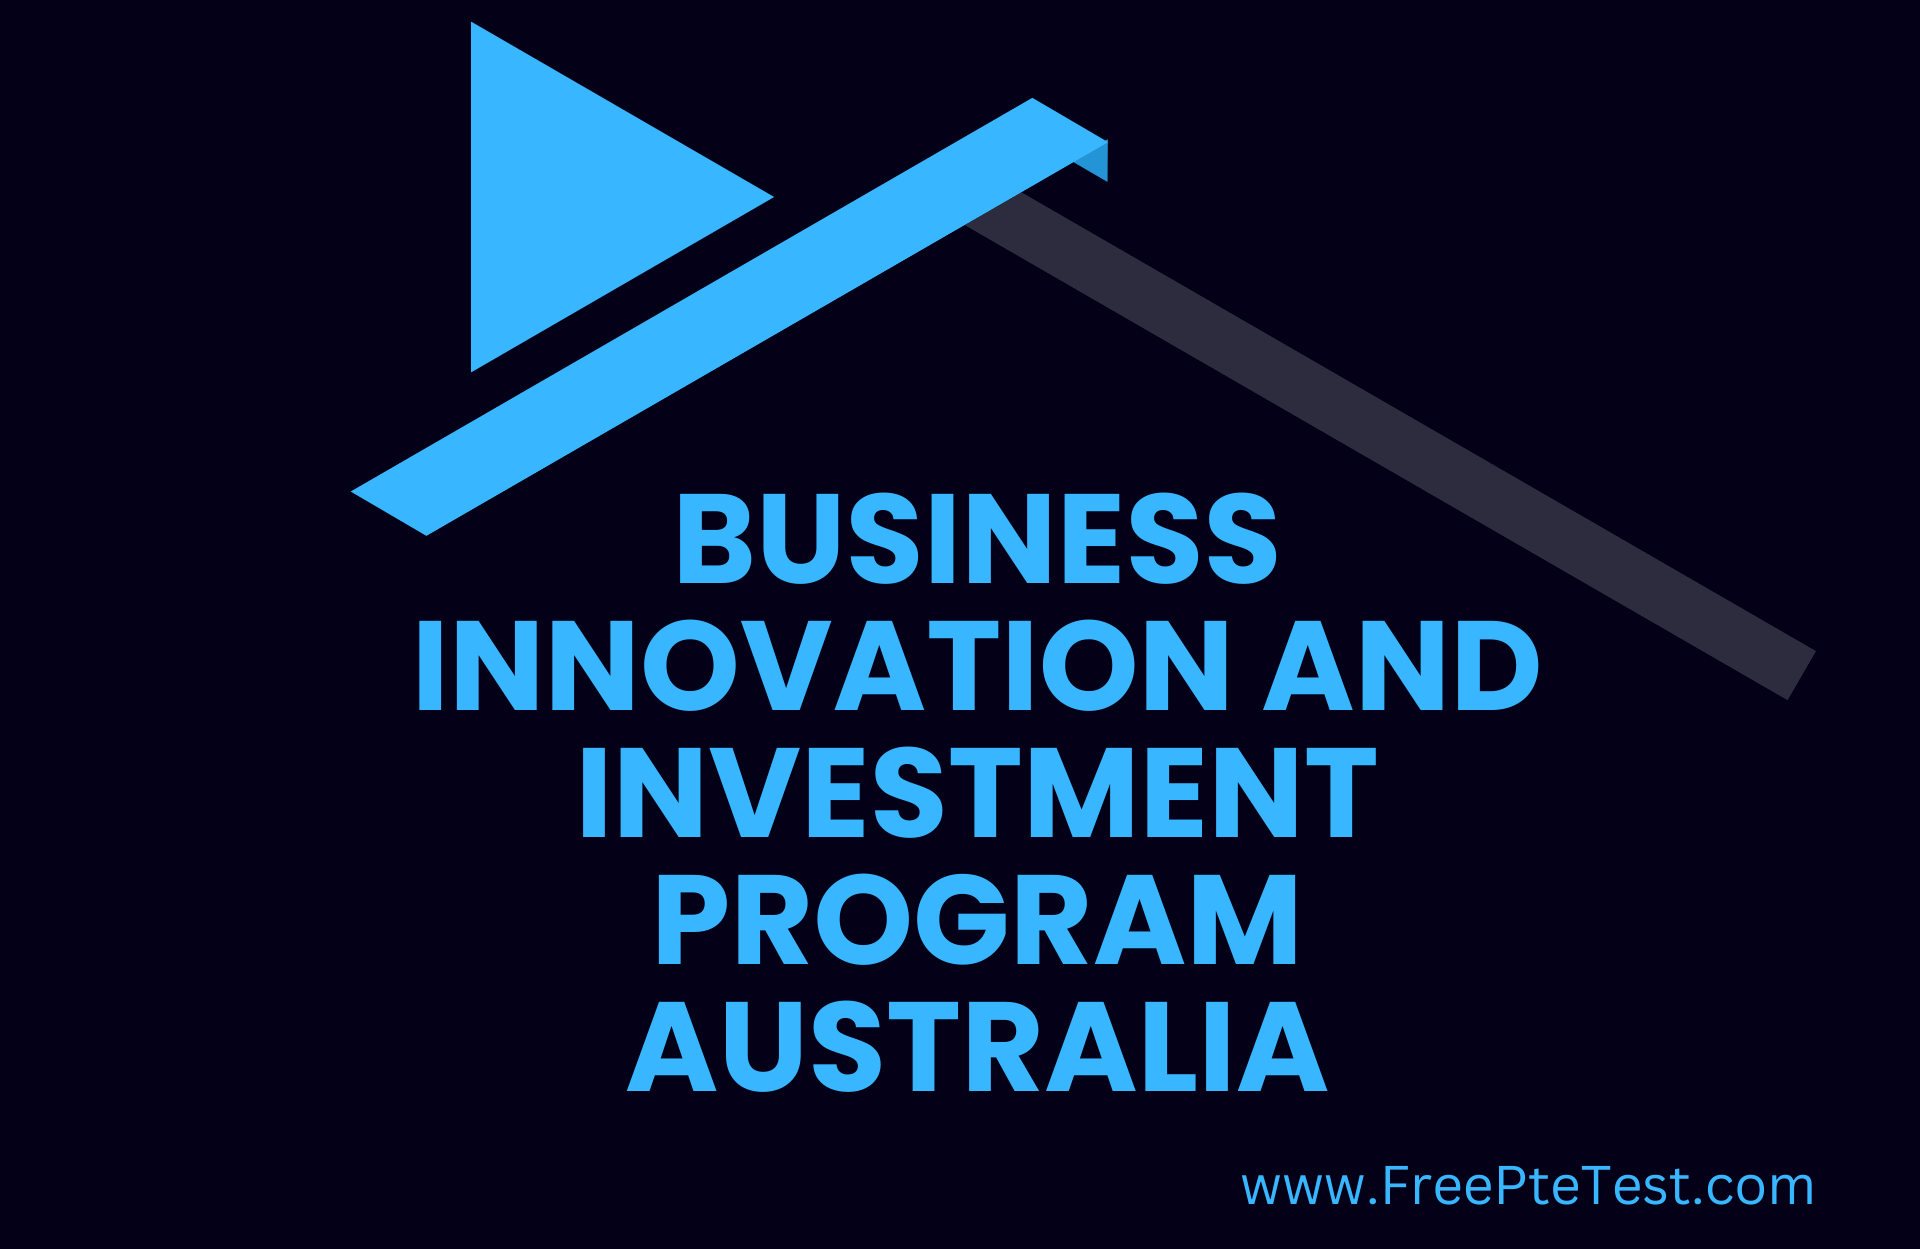 You are currently viewing Business Innovation and Investment Program Australia